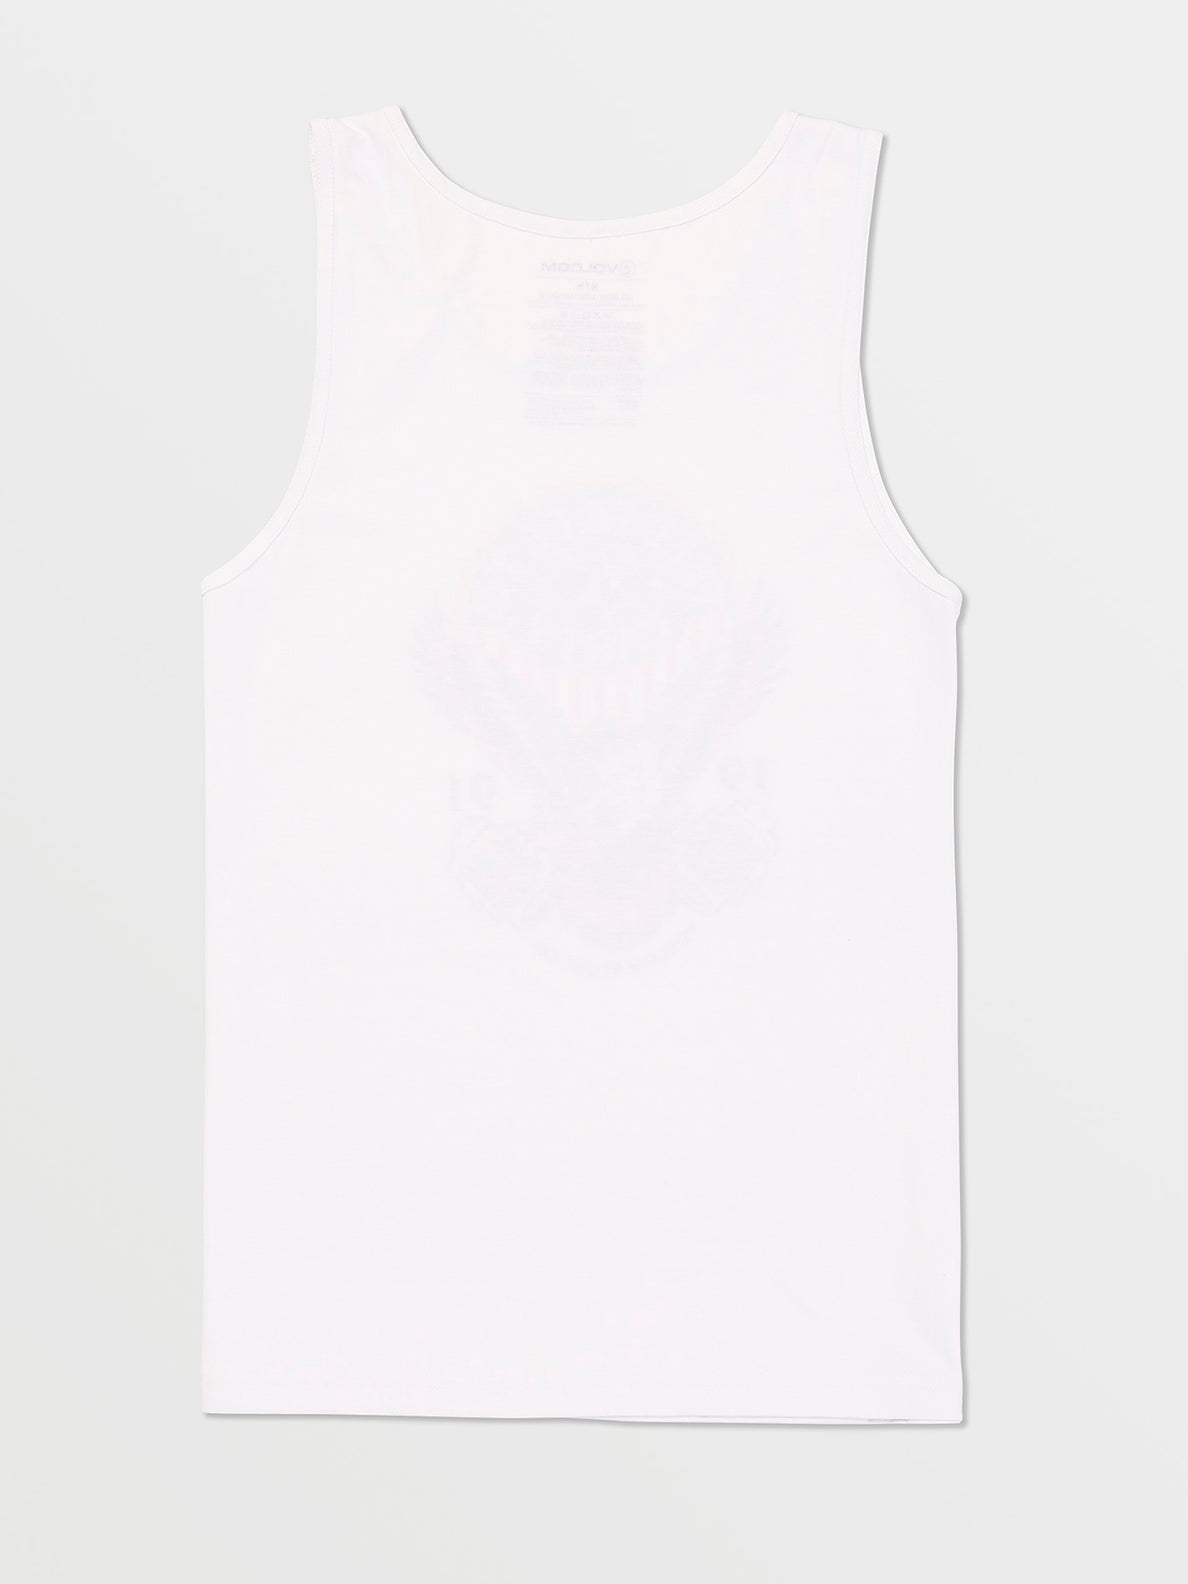 Solid Heather Tank - White